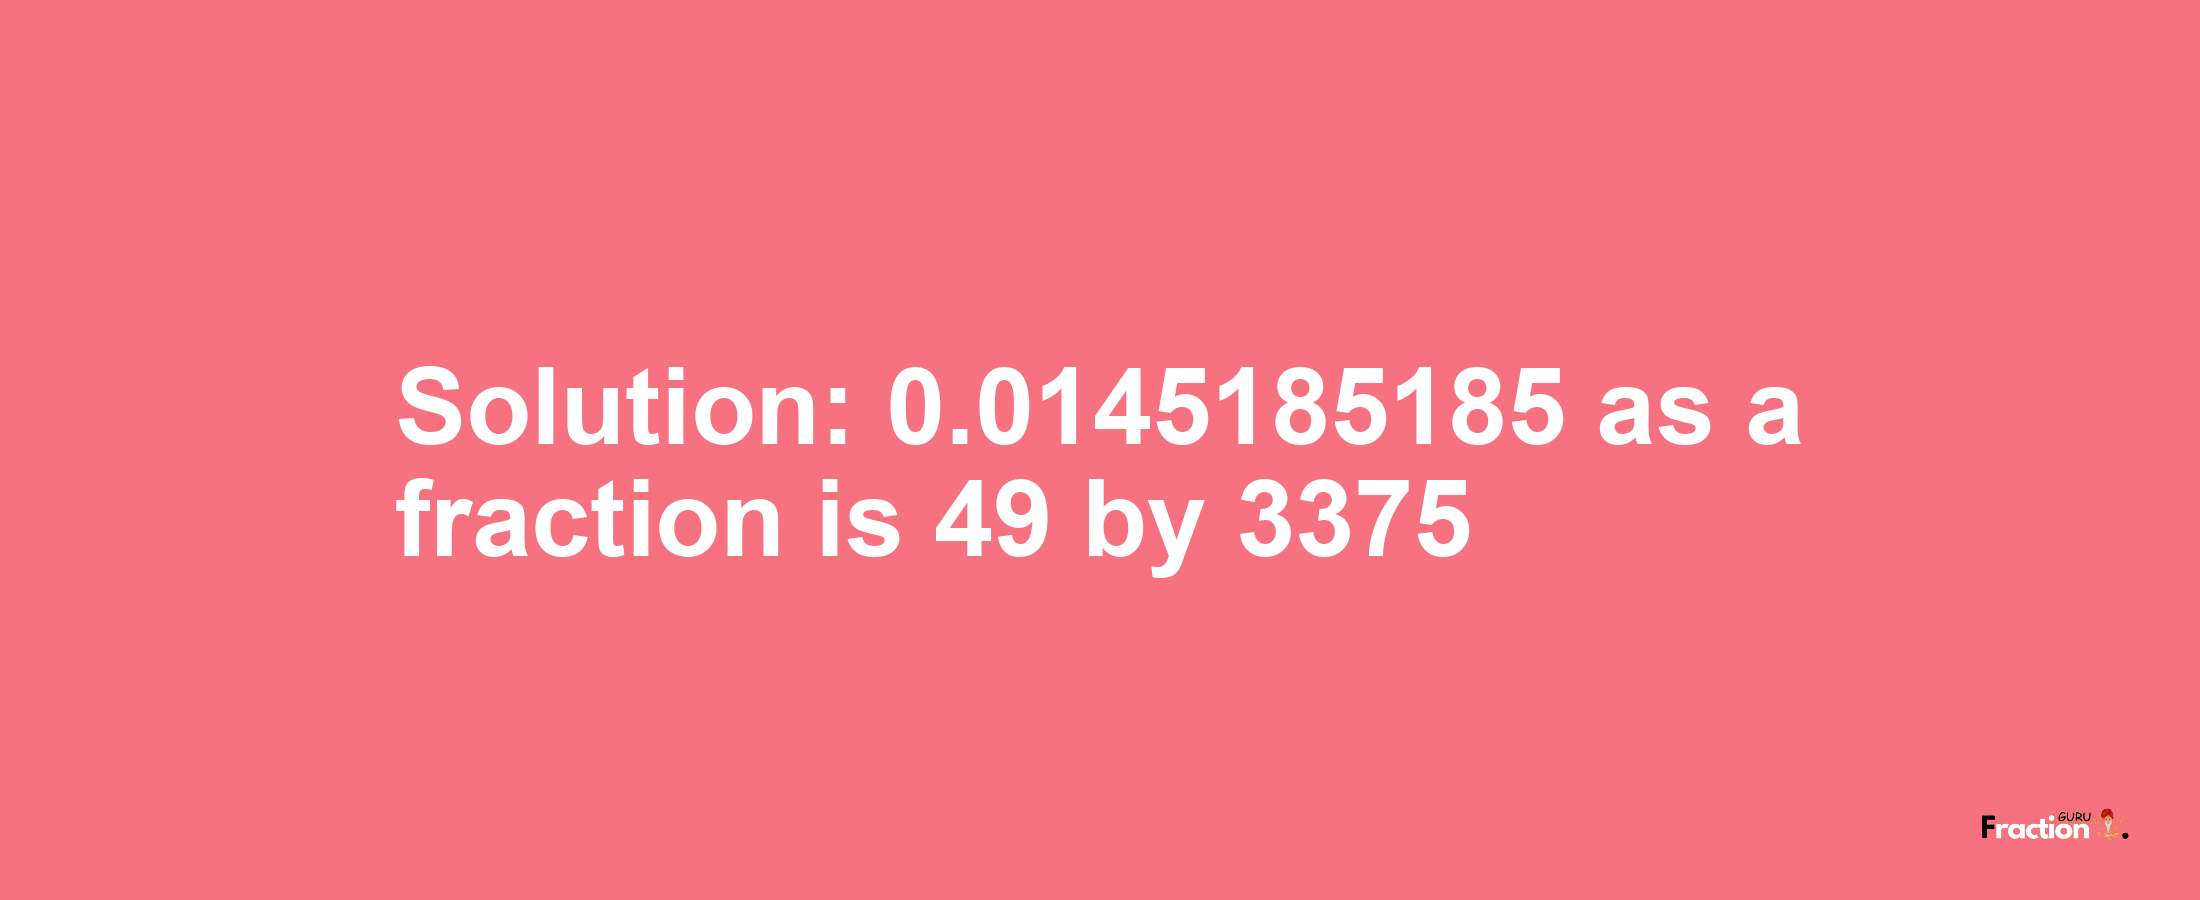 Solution:0.0145185185 as a fraction is 49/3375